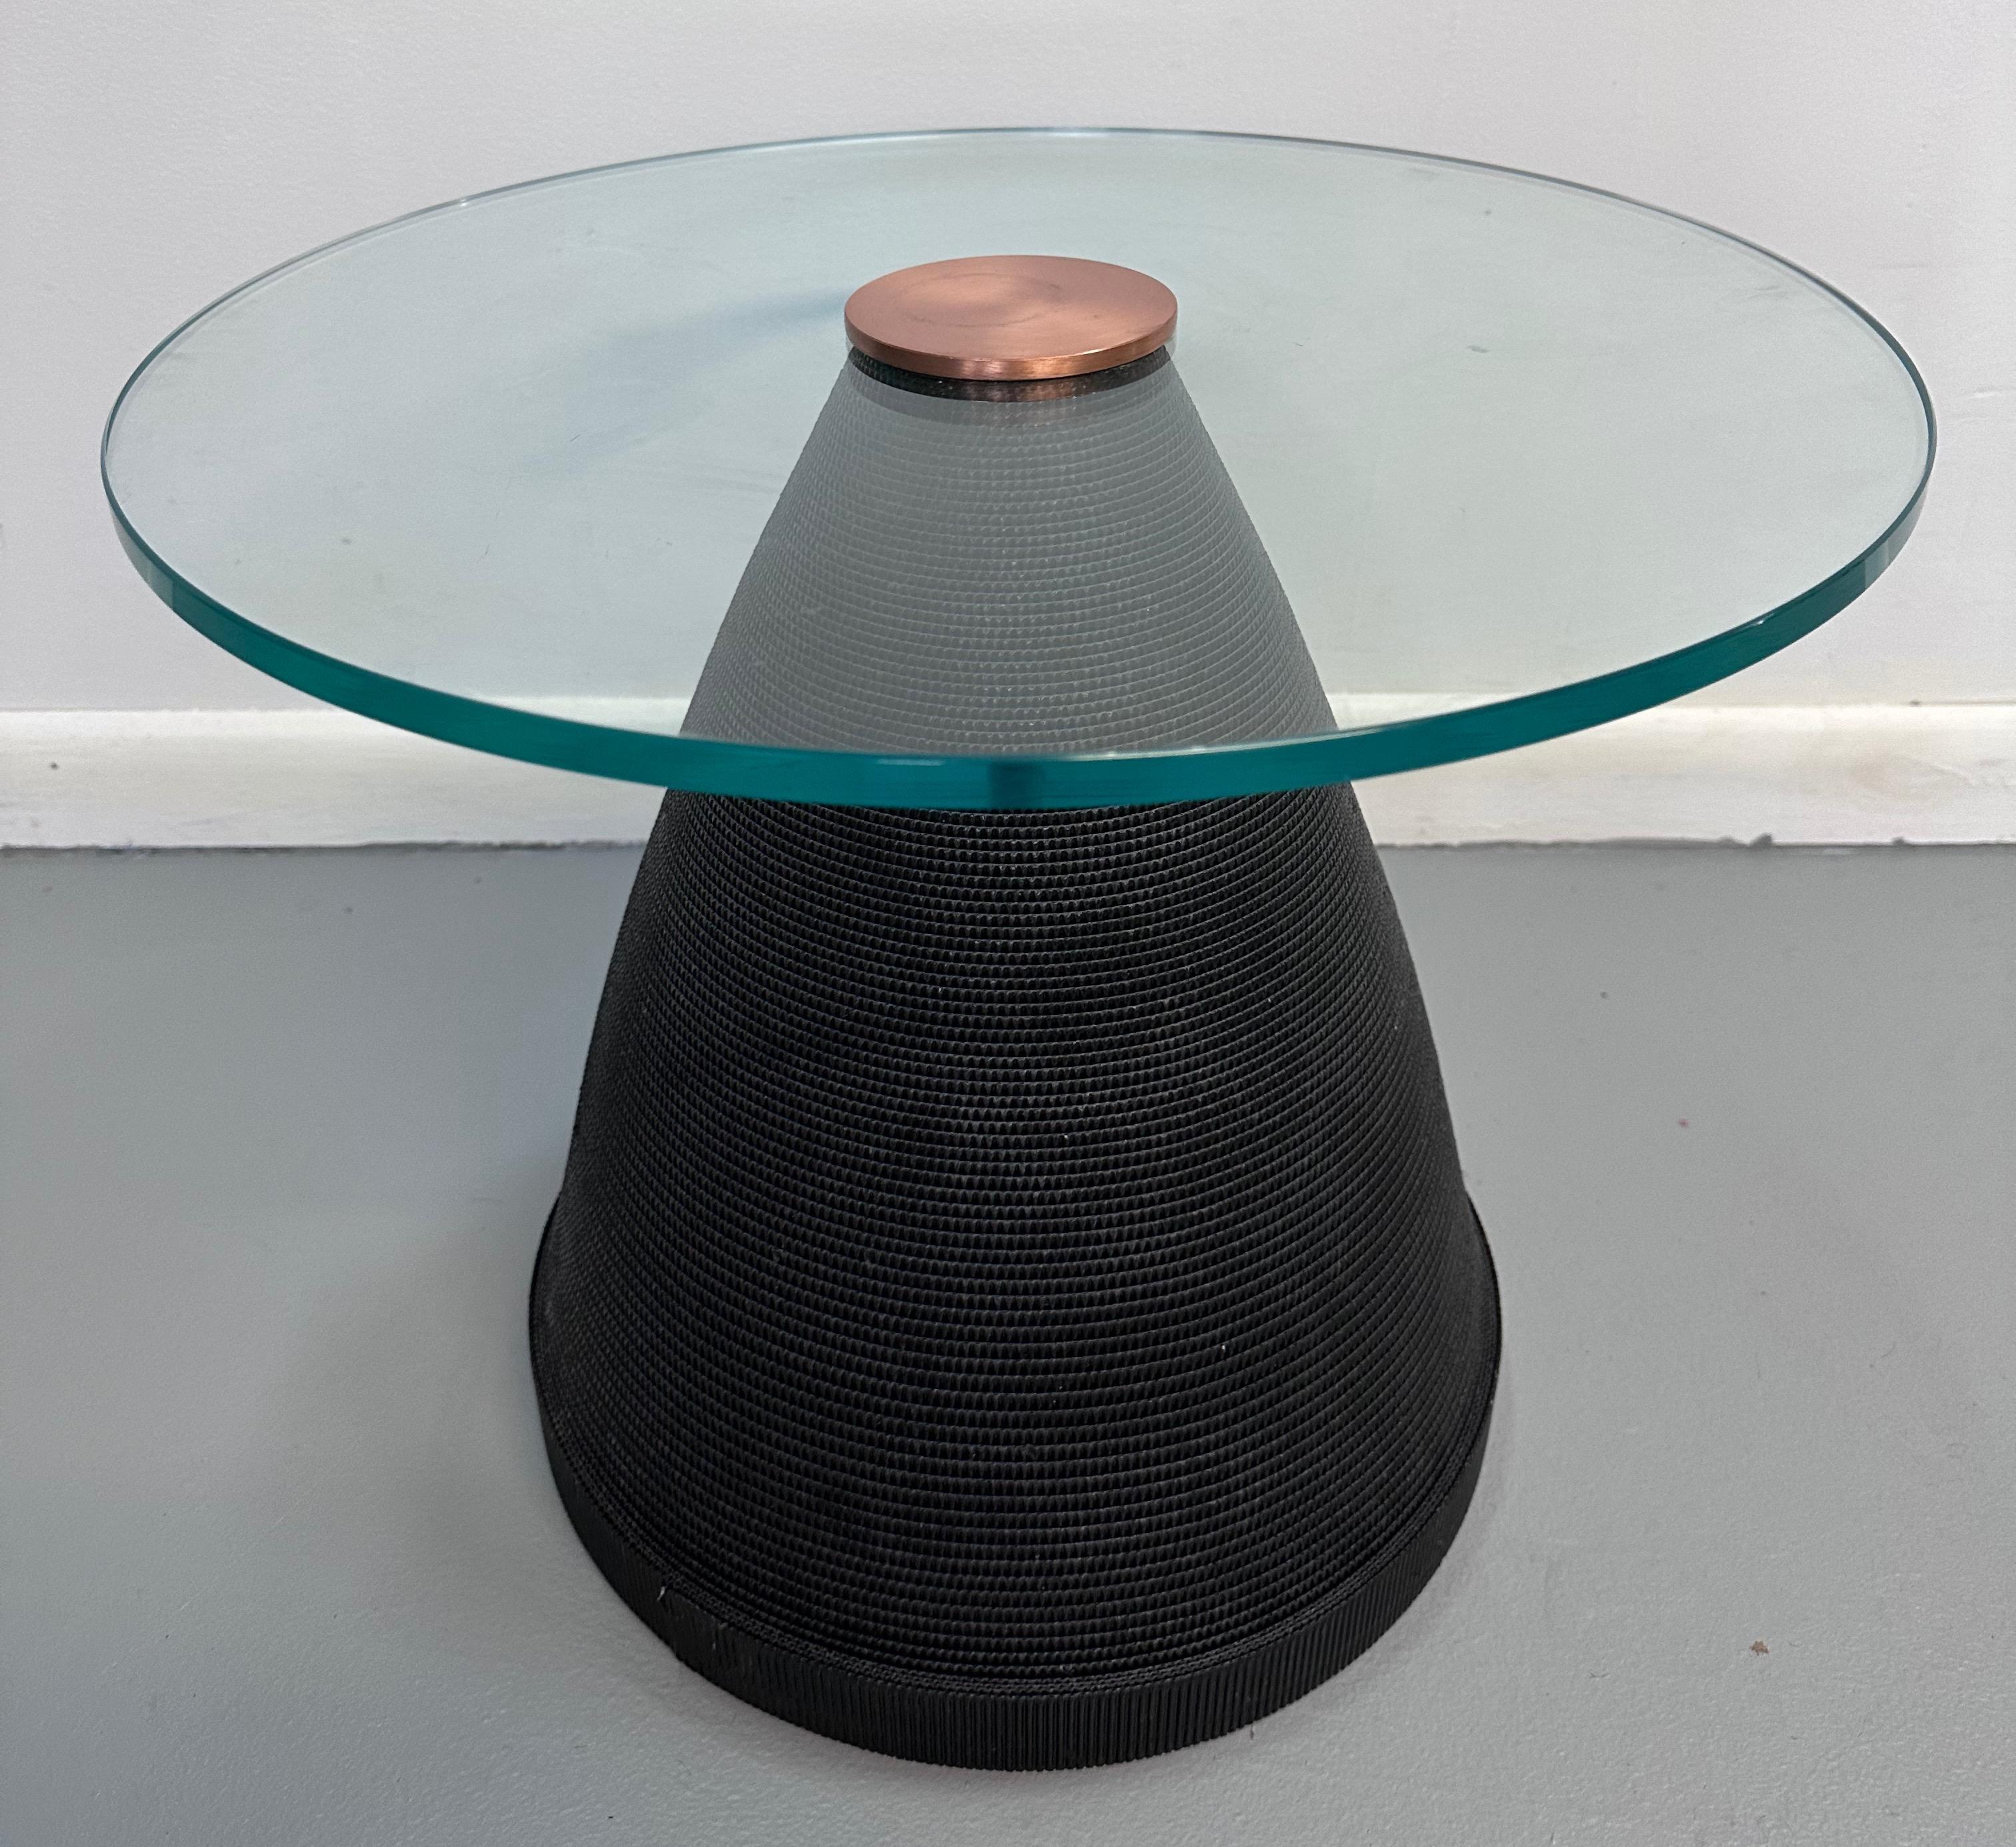 A wonderful post modern side table constructed of black corrugated cardboard wrapped in a a tapered cone shape, topped with a 20